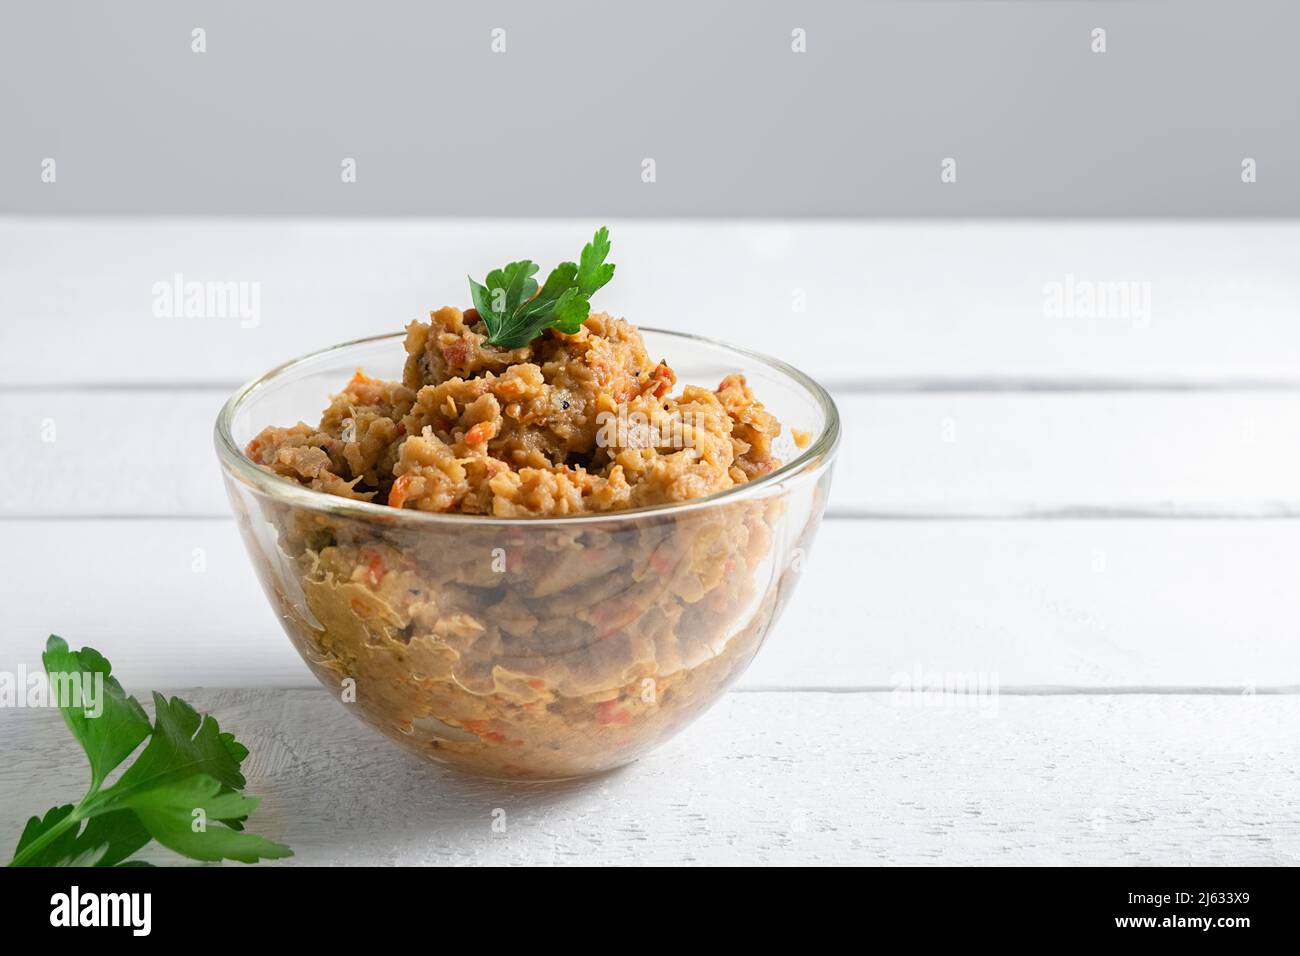 Kiopoolu, smoked eggplant dip in a glass bowl on white table with copy space Stock Photo